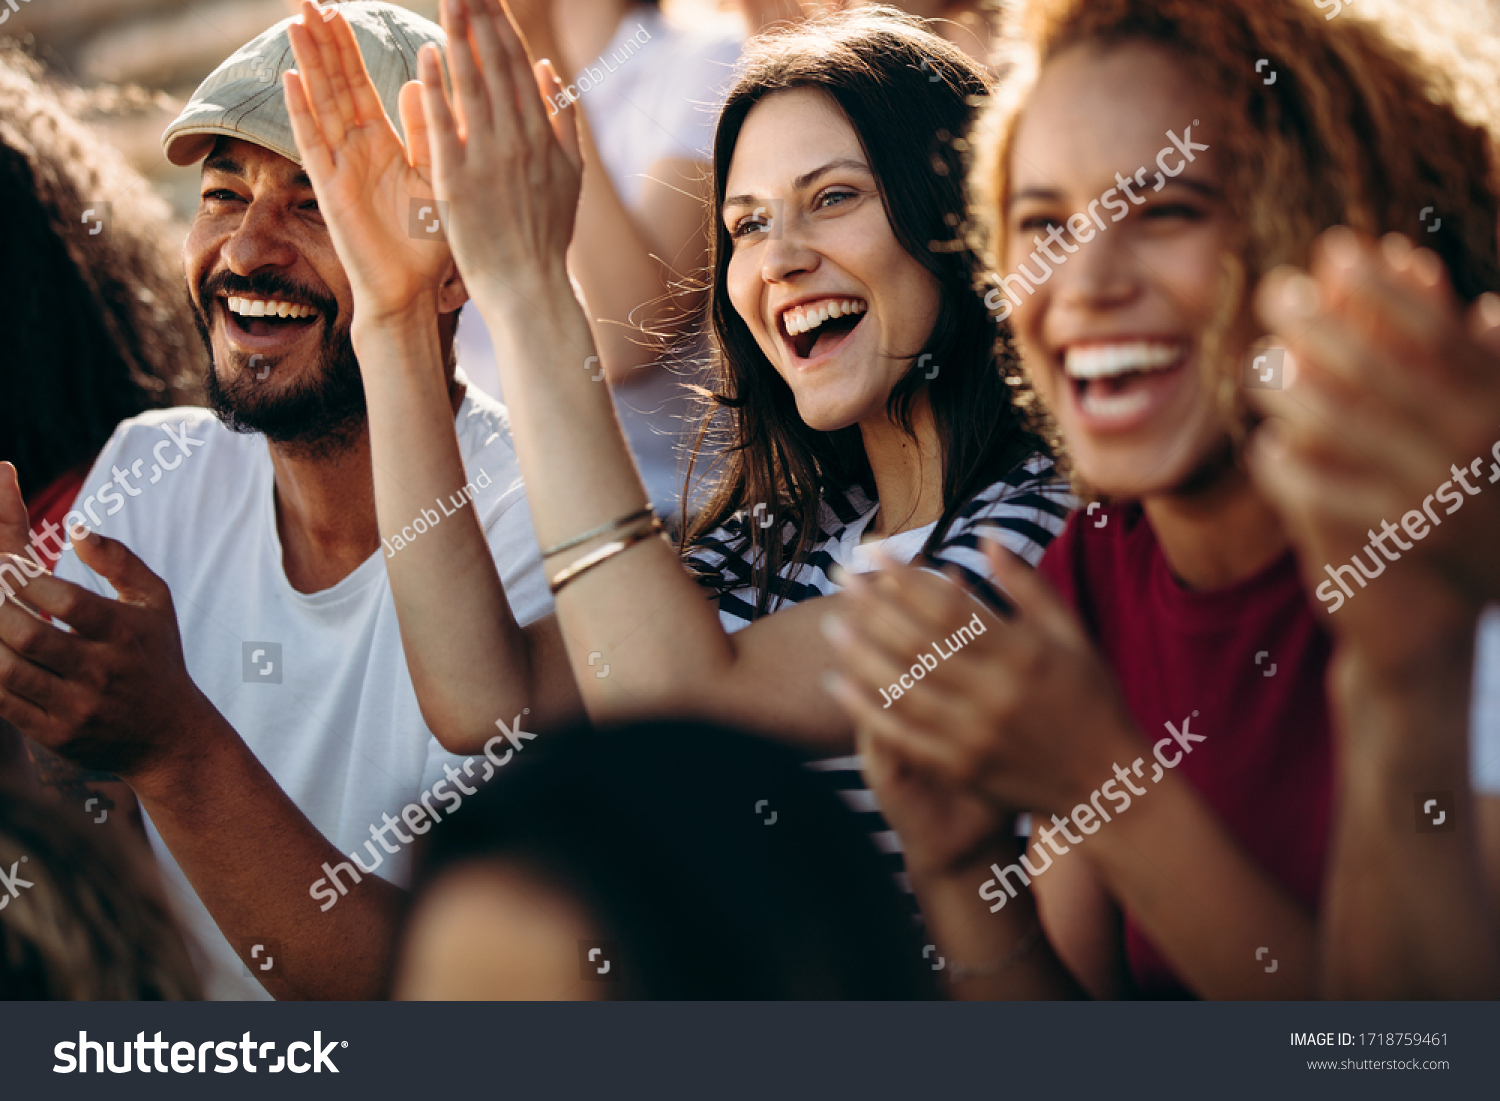 Group of fans watching a sports event in the stands of a stadium. Group of men and women spectators cheering for their team victory. #1718759461